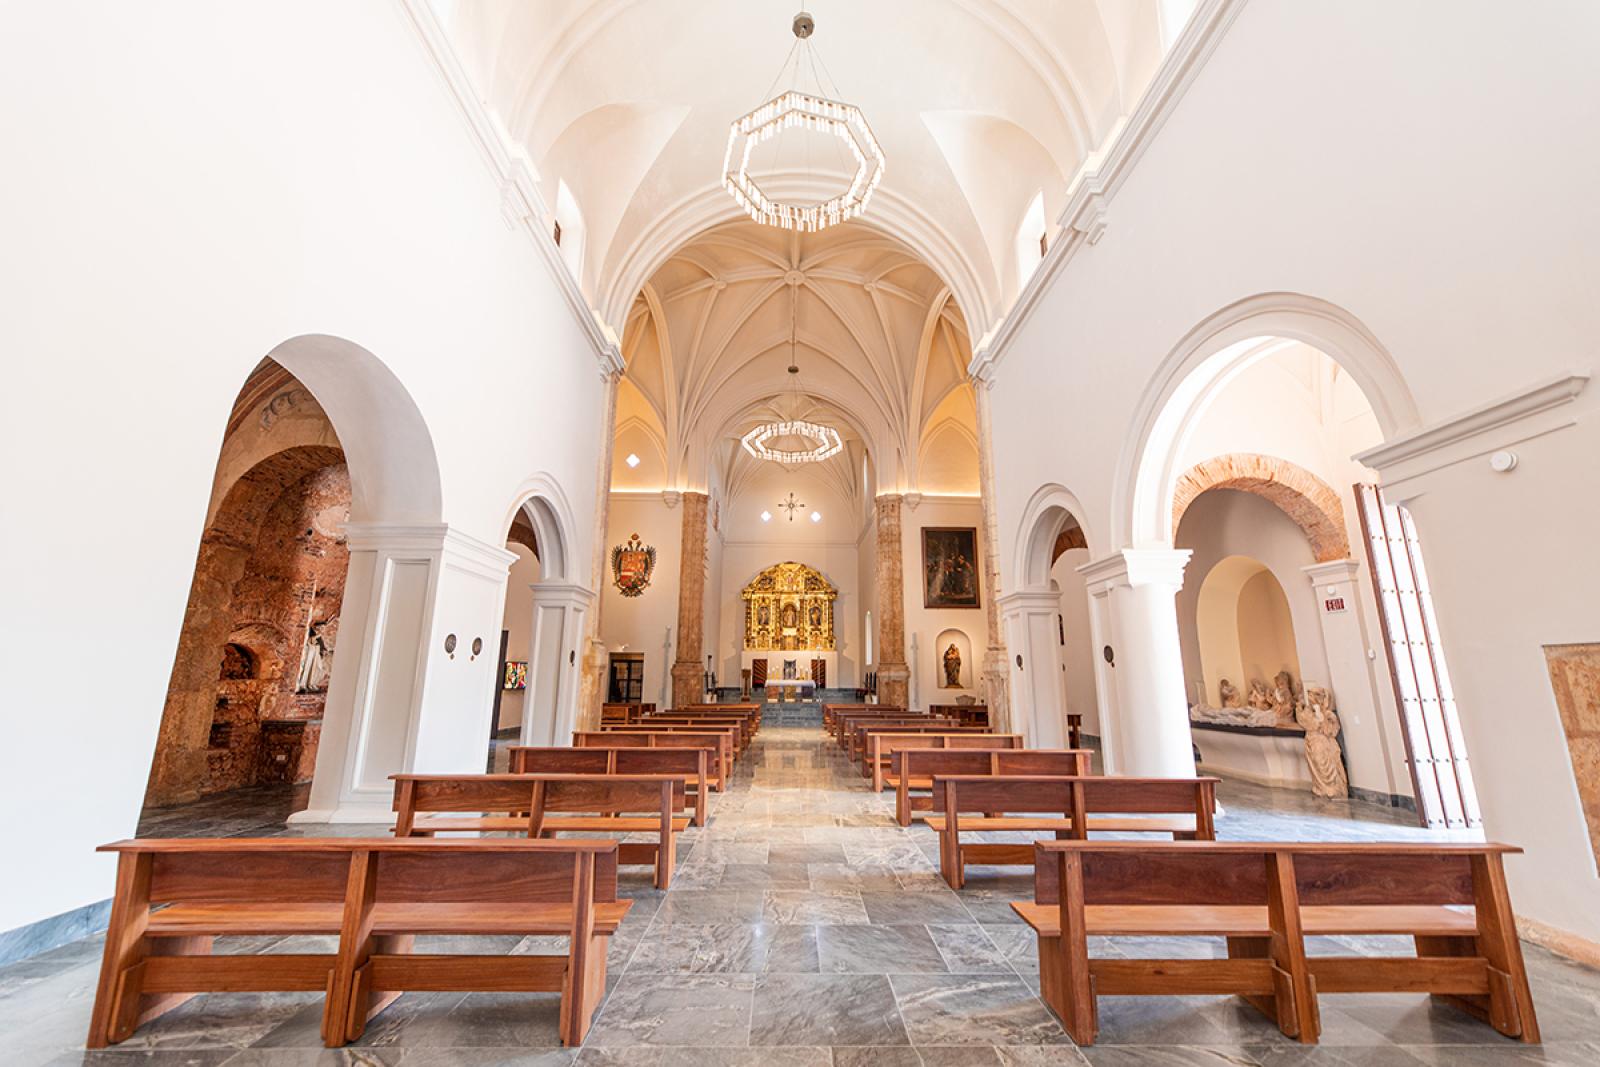 Inside view of the San José Church, one of the oldest in America and built in 1532.